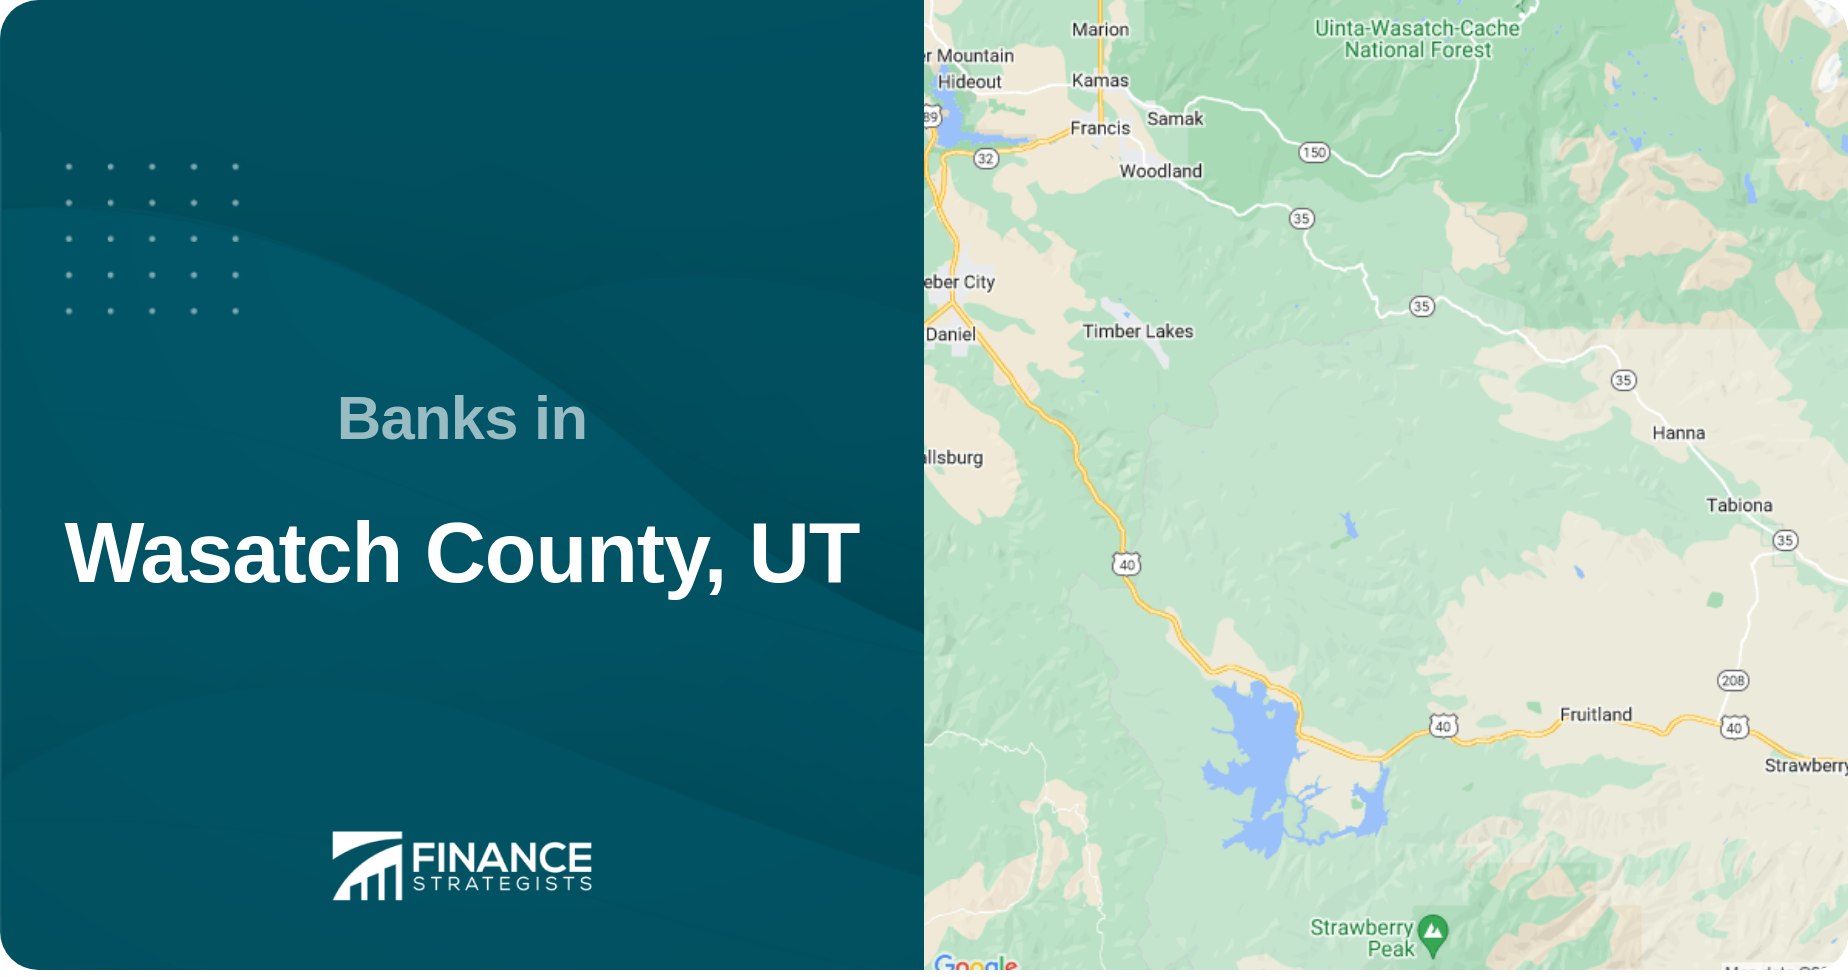 Banks in Wasatch County, UT